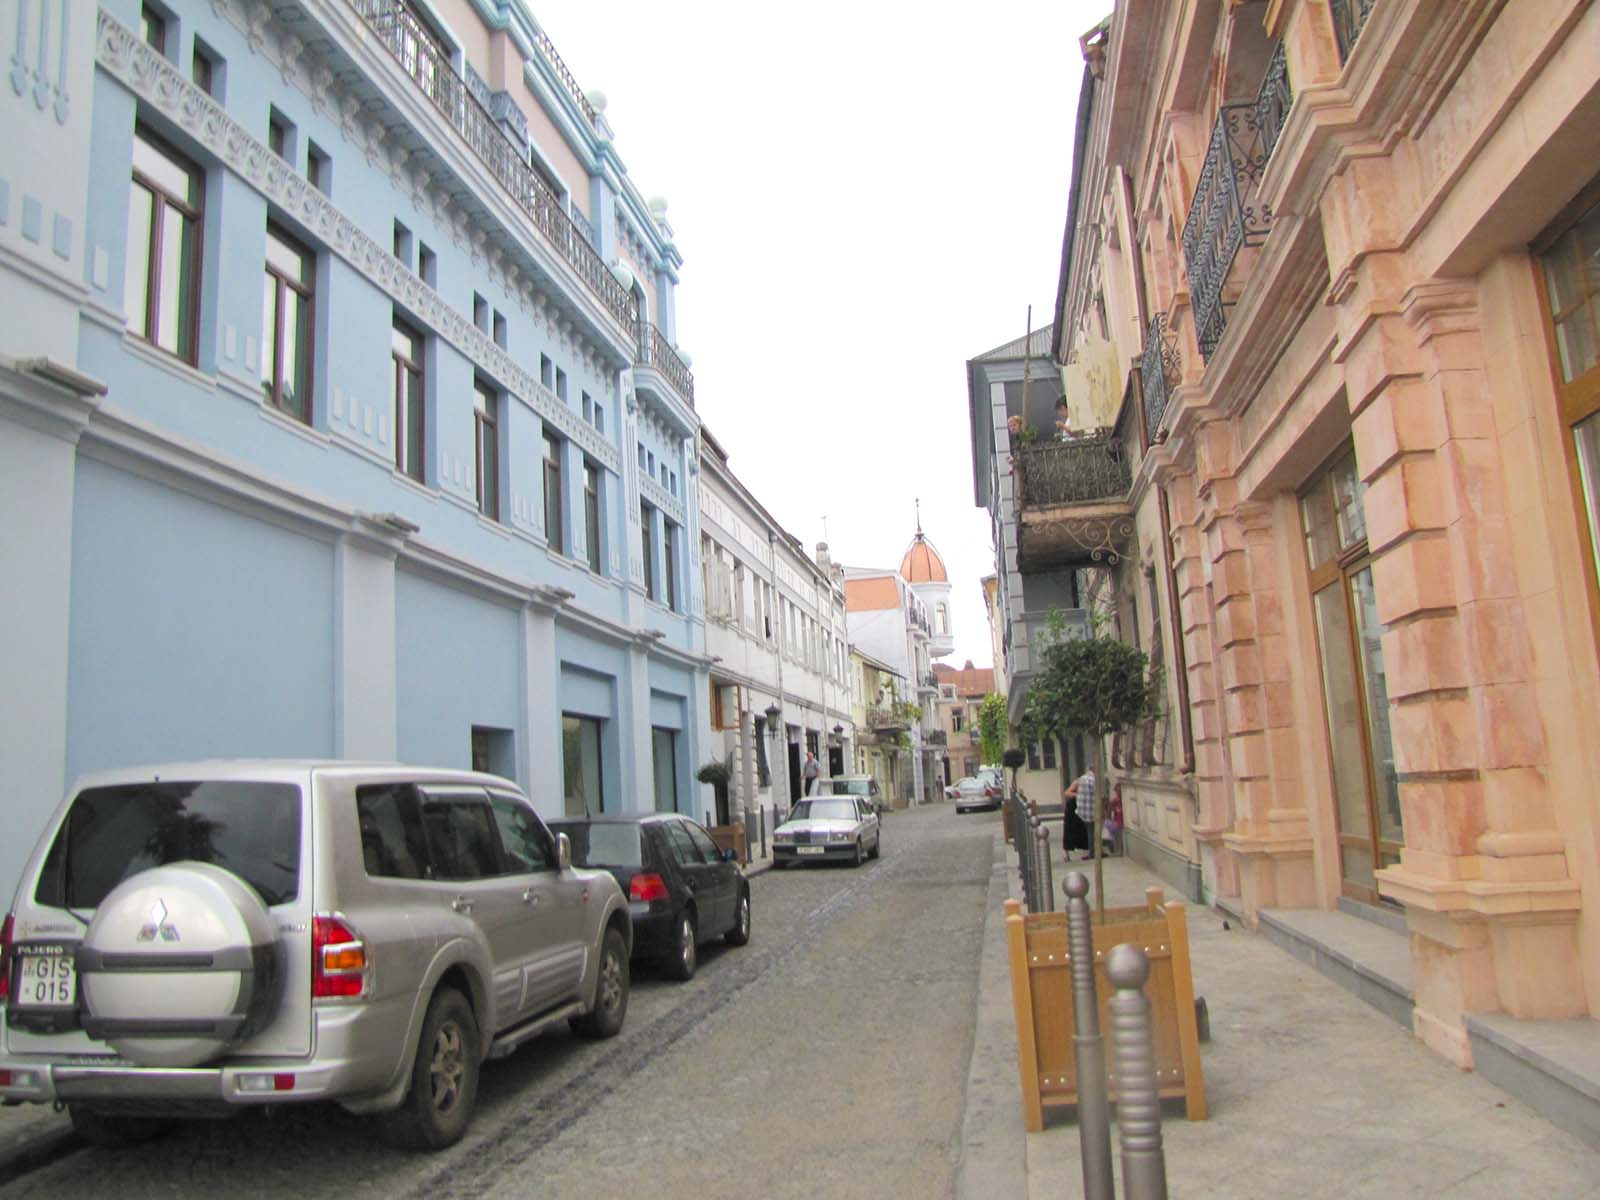 The small streets in the city center of Batumi